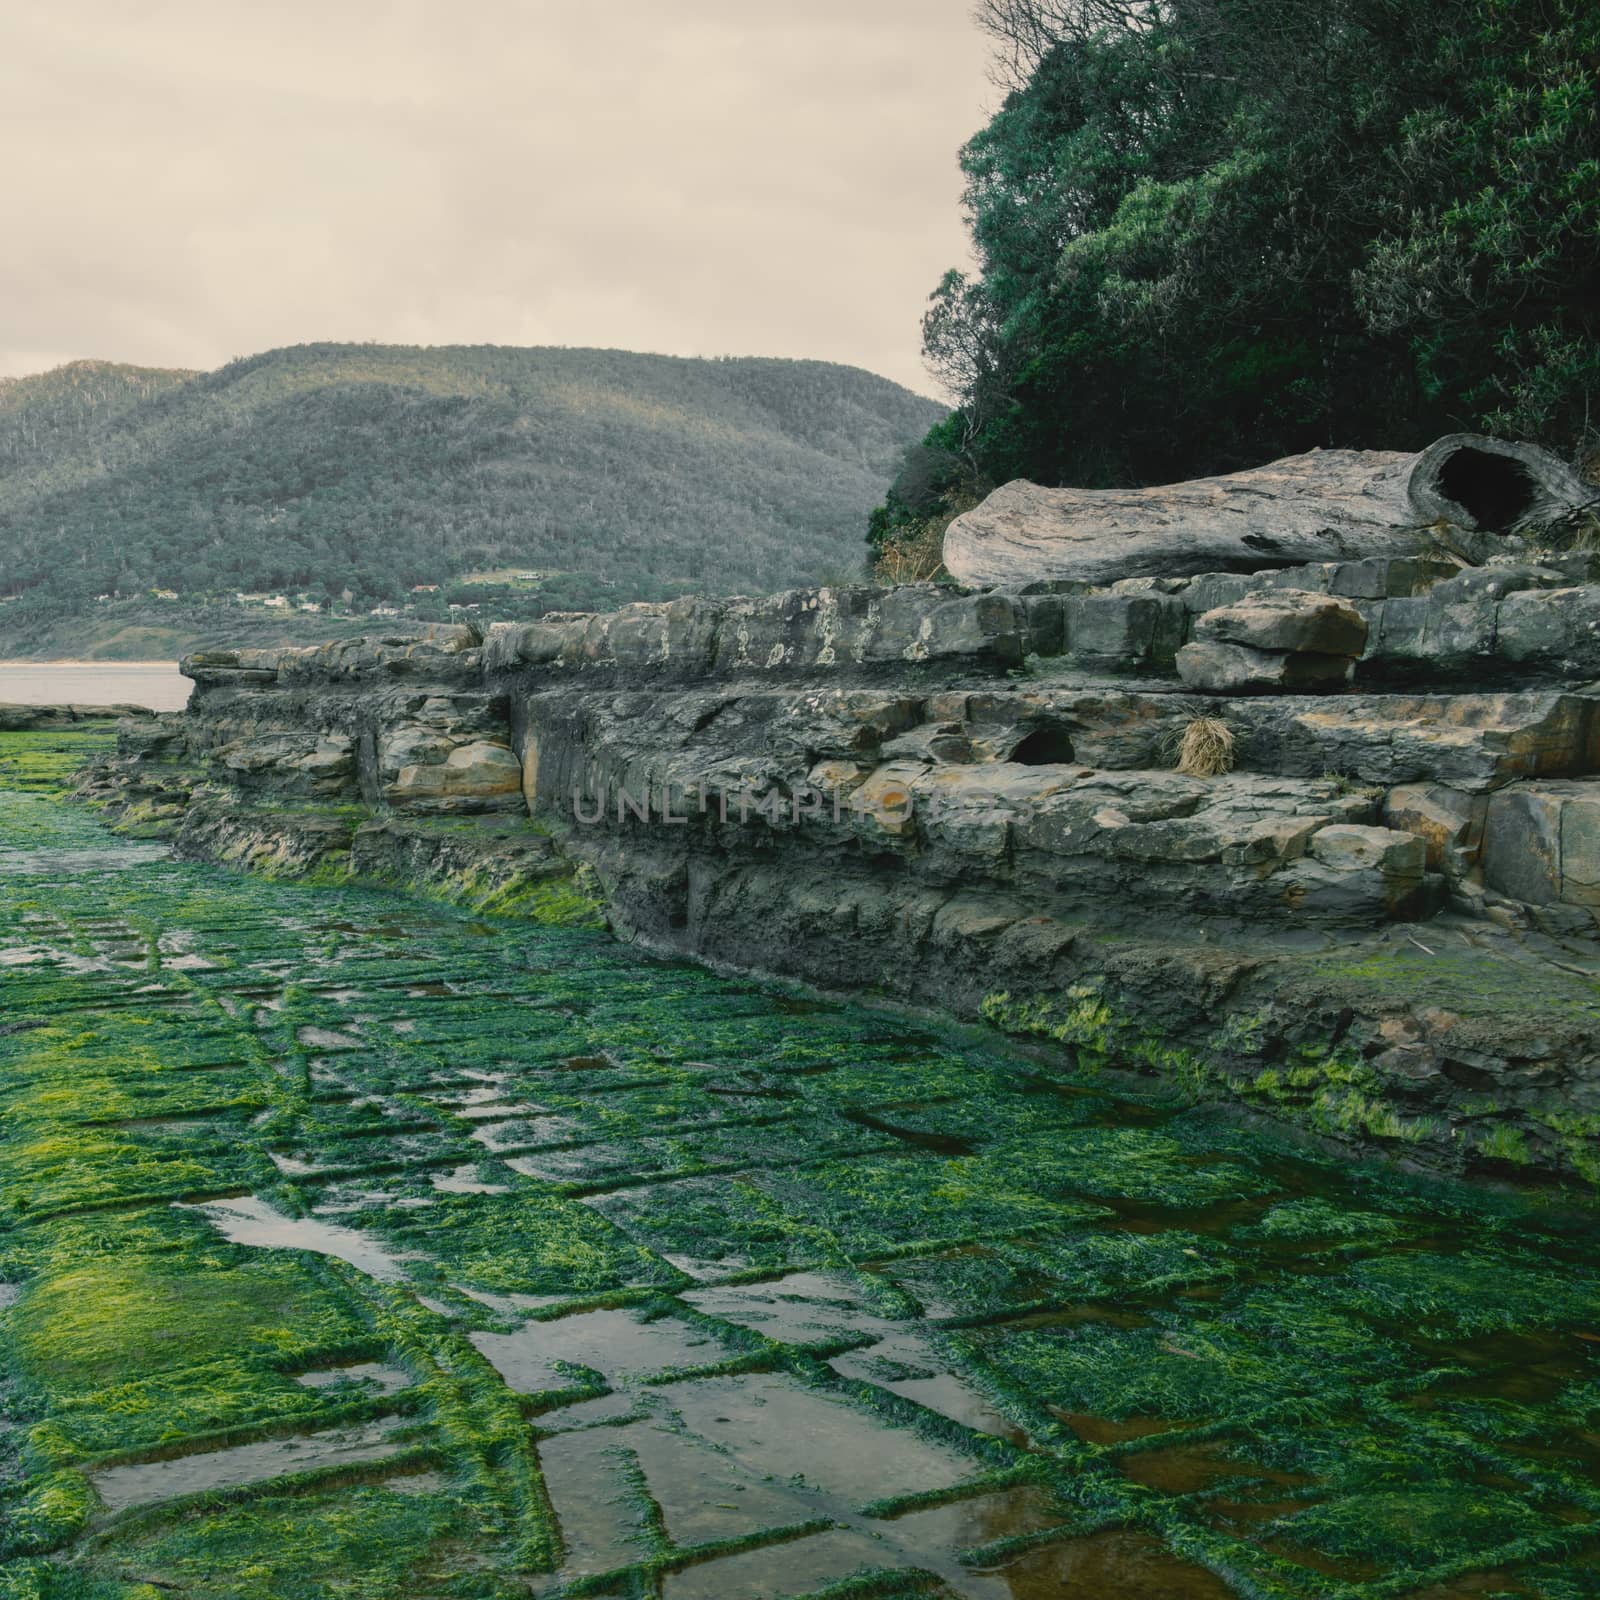 View of Tessellated Pavement in Pirates Bay, Tasmania.